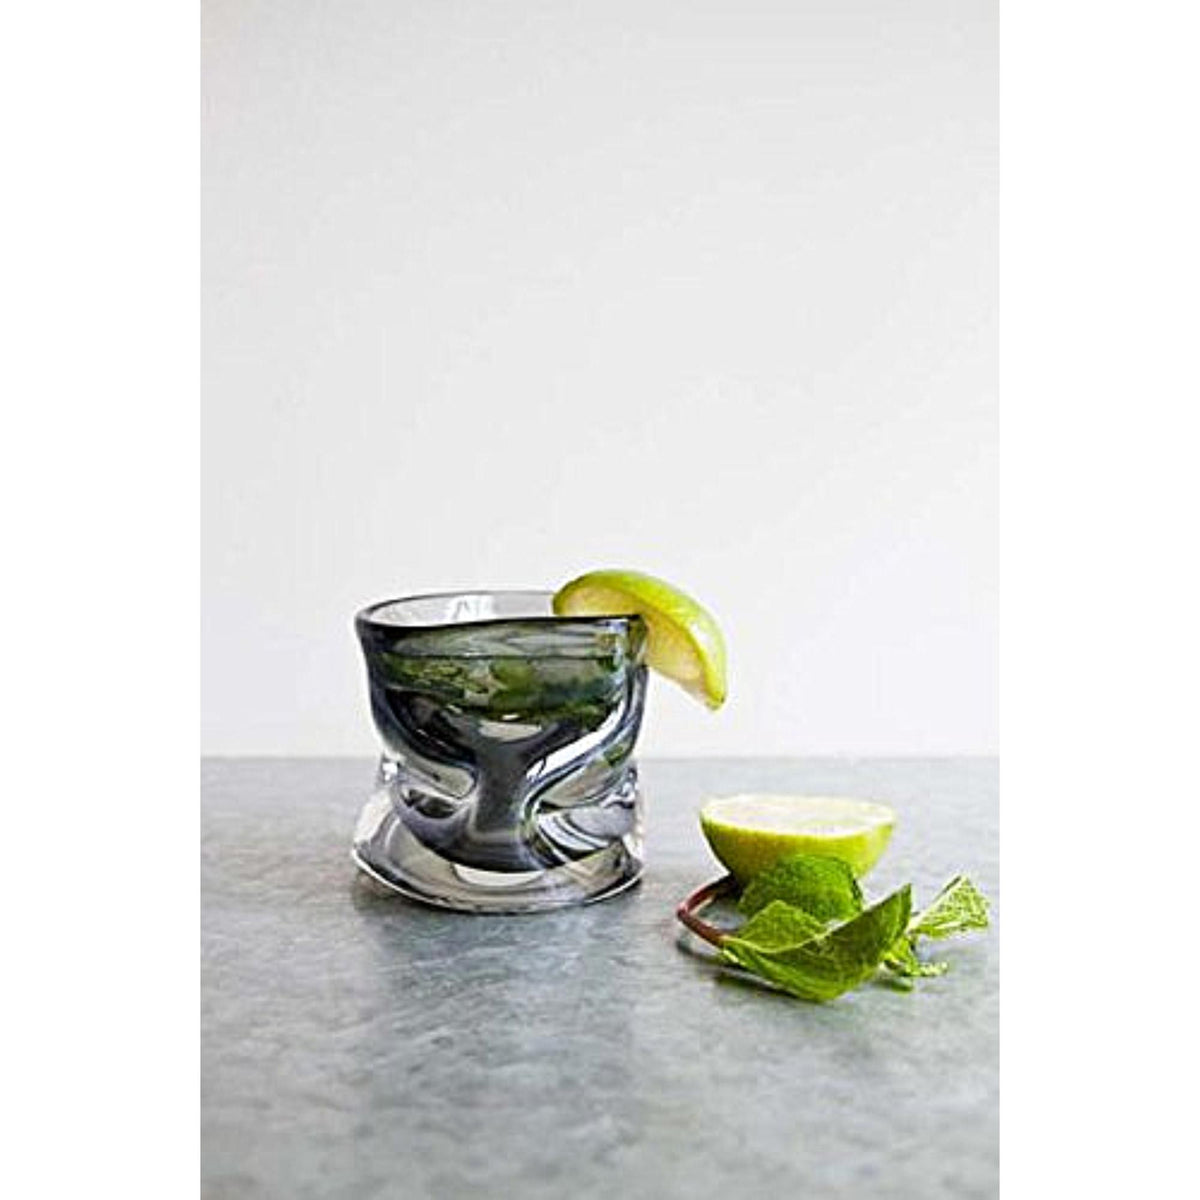 HOSLEY®  Glass Crumple Vase / Candle Holder, Olive Color, 4 inches Diameter